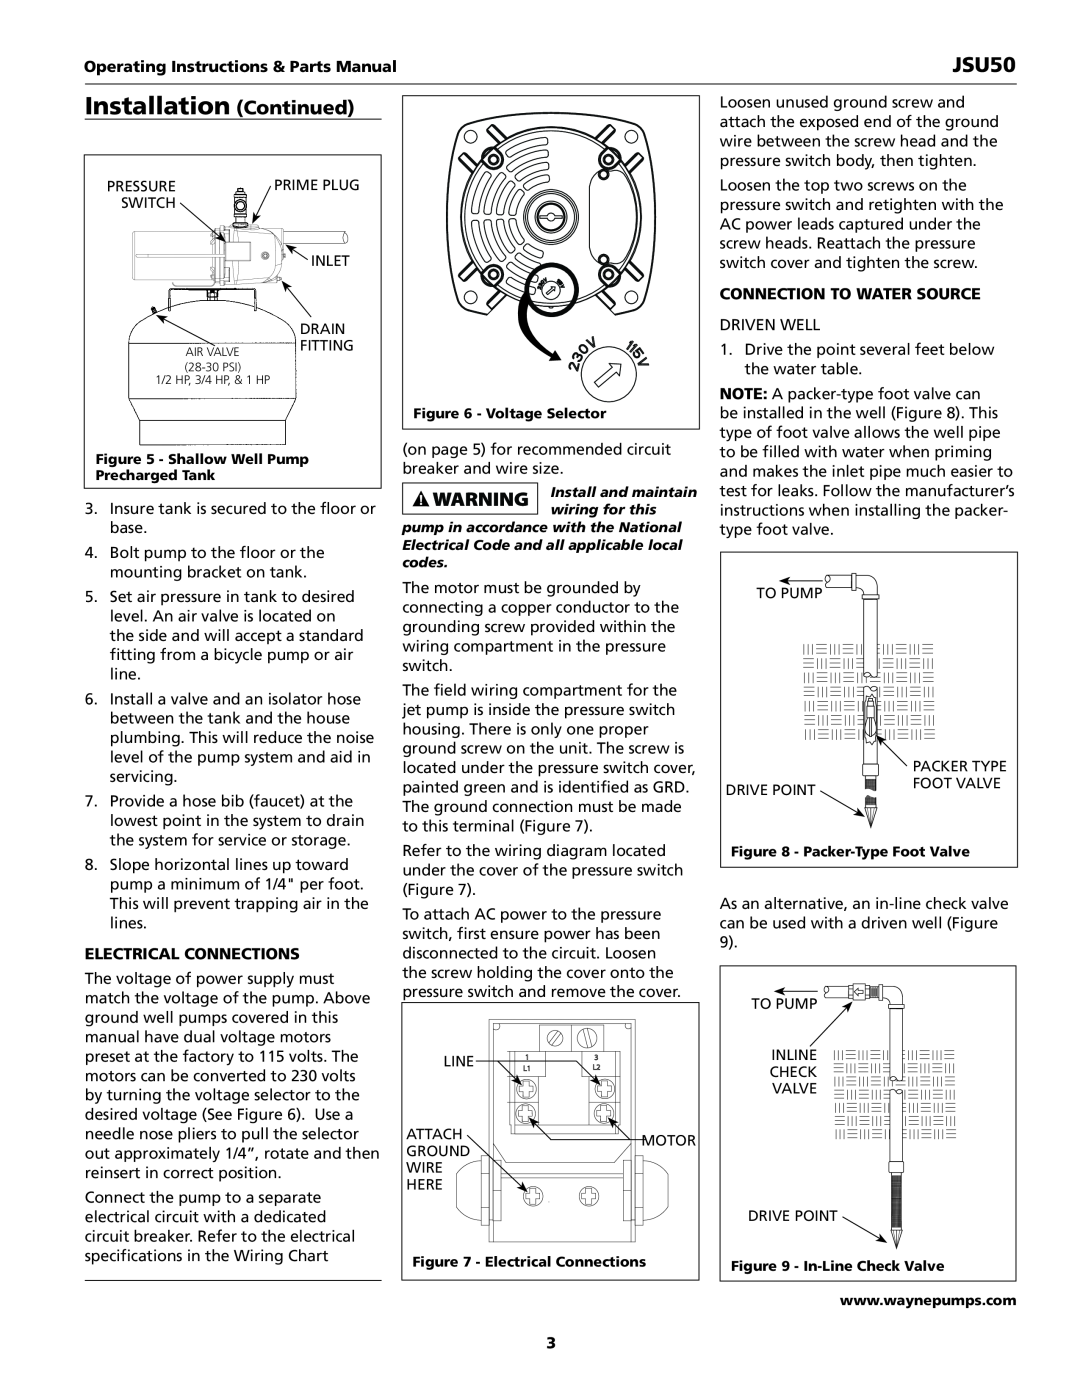 Wayne JSU50 Operating Instructions & Parts Manual, electrical connections, connection to water source 